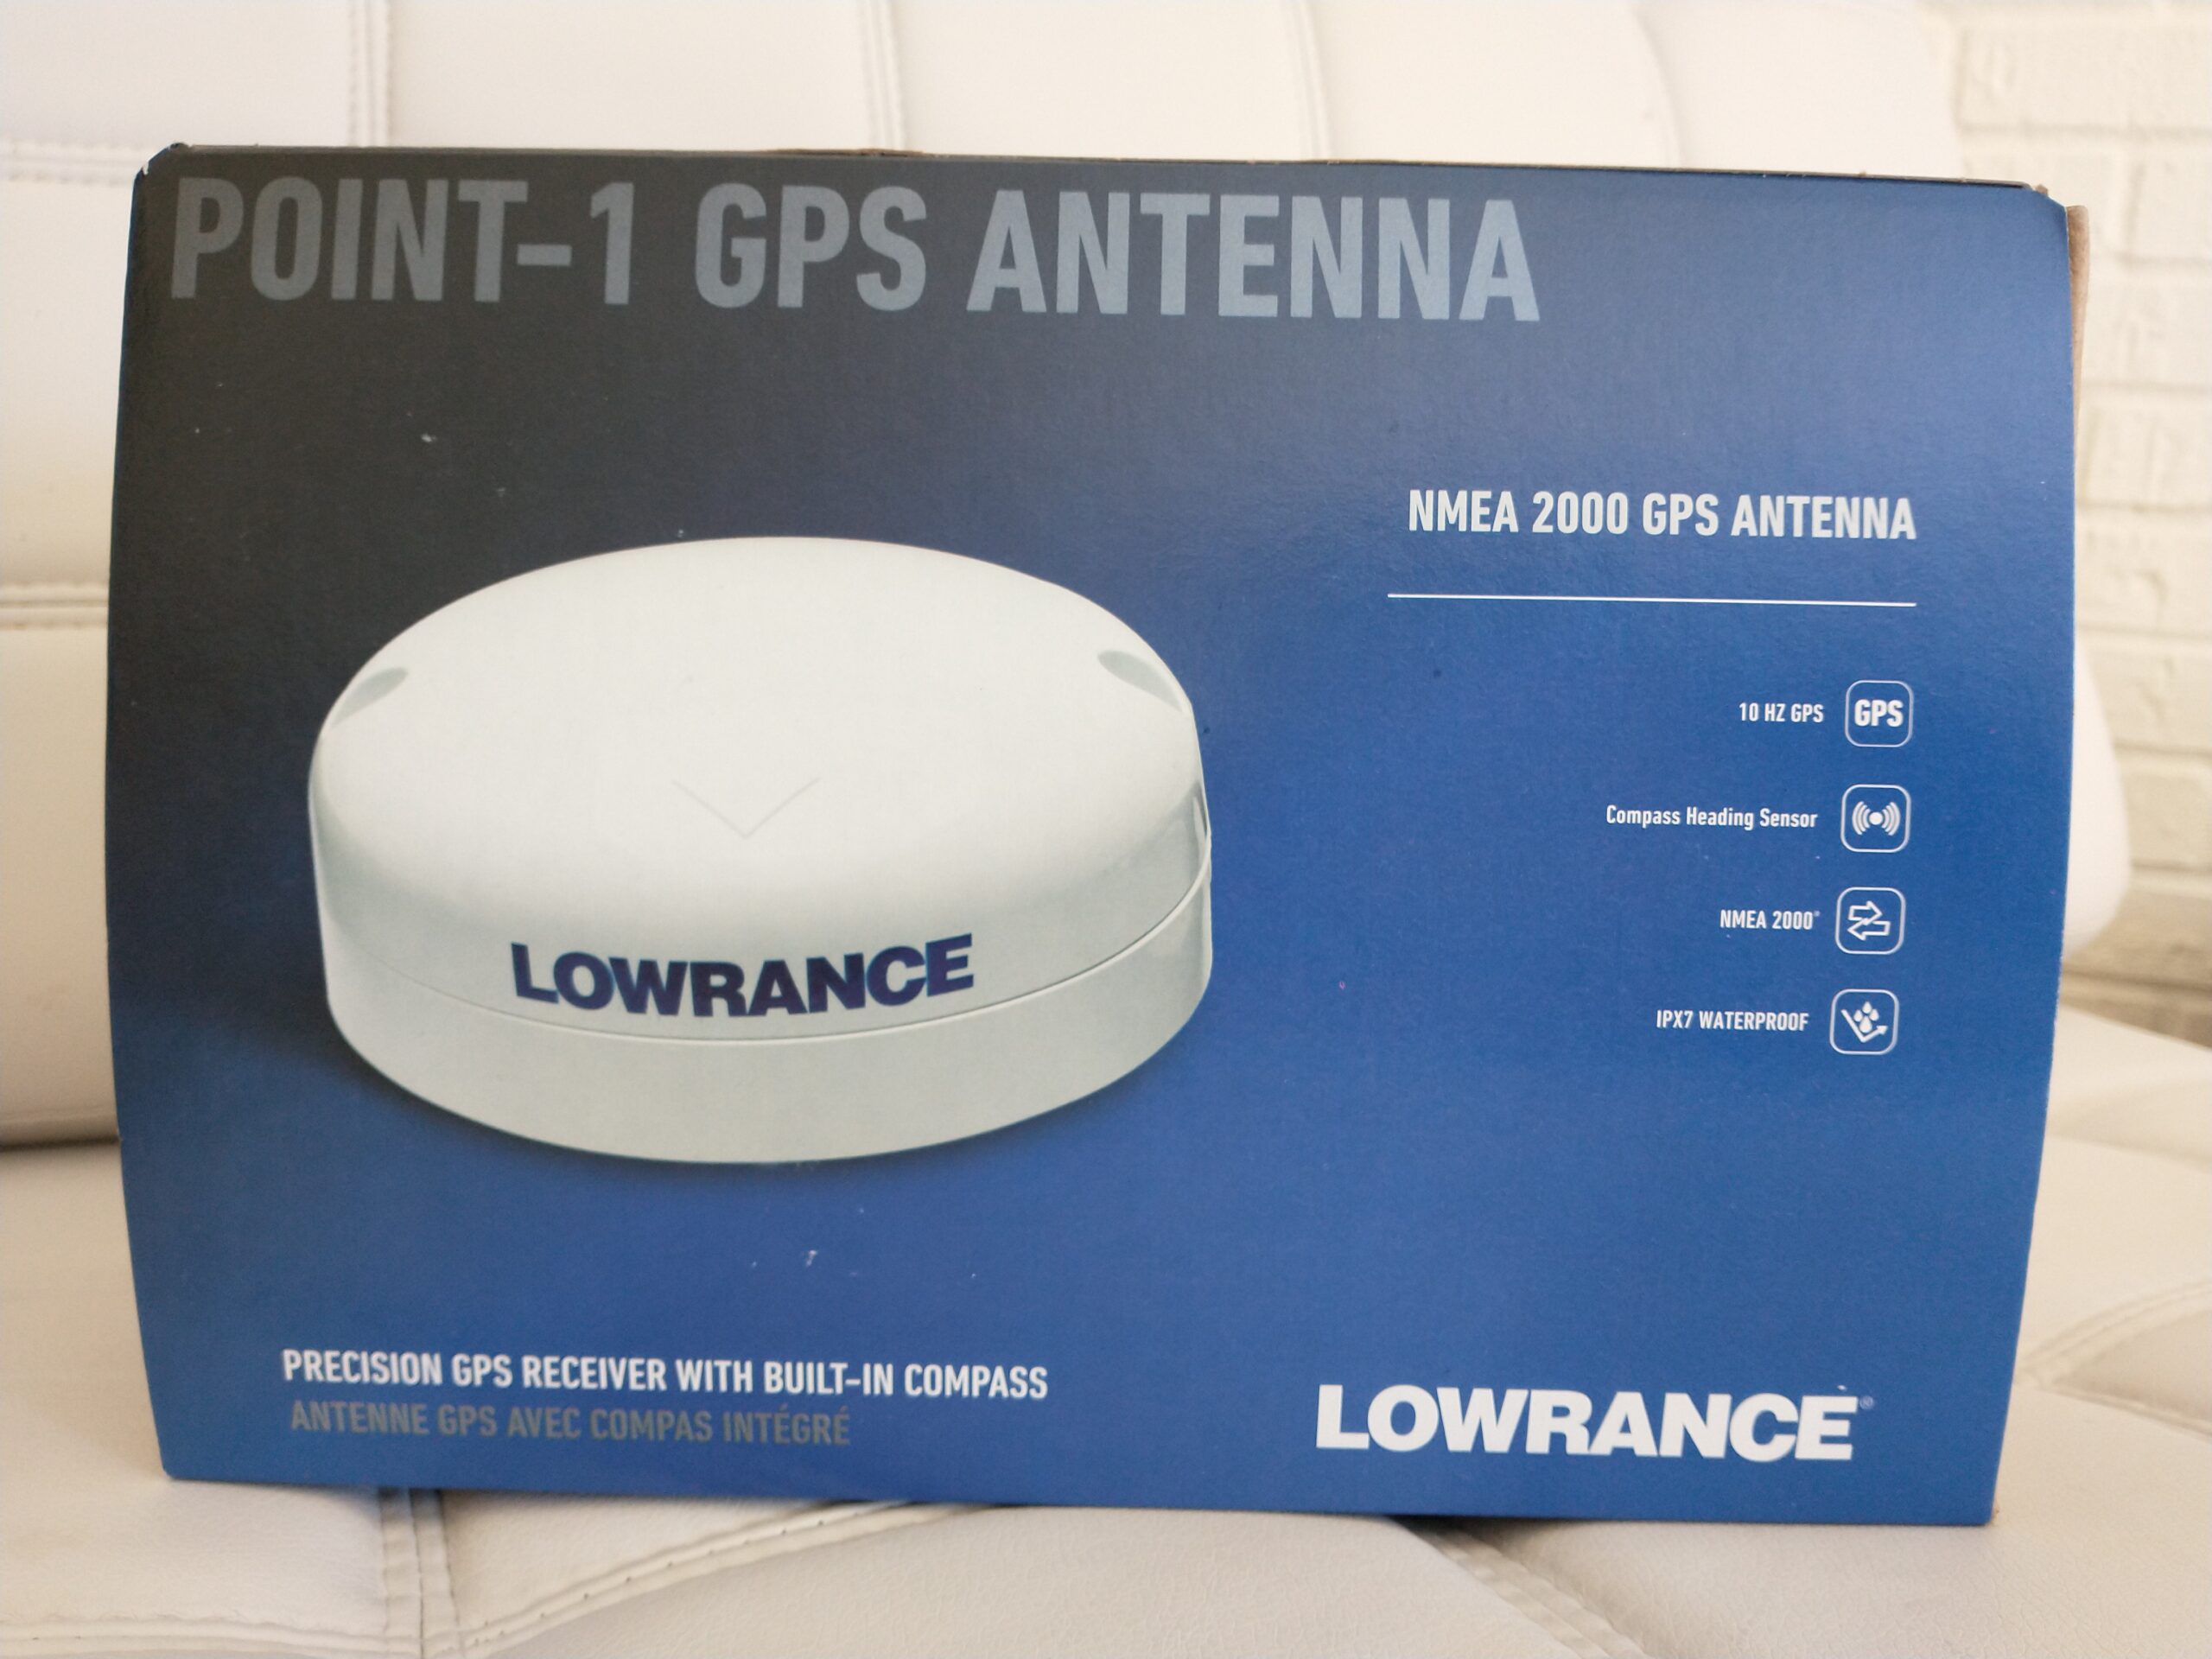 Lowrance Point-1 GPS. in Box - Classified | In-Depth Outdoors